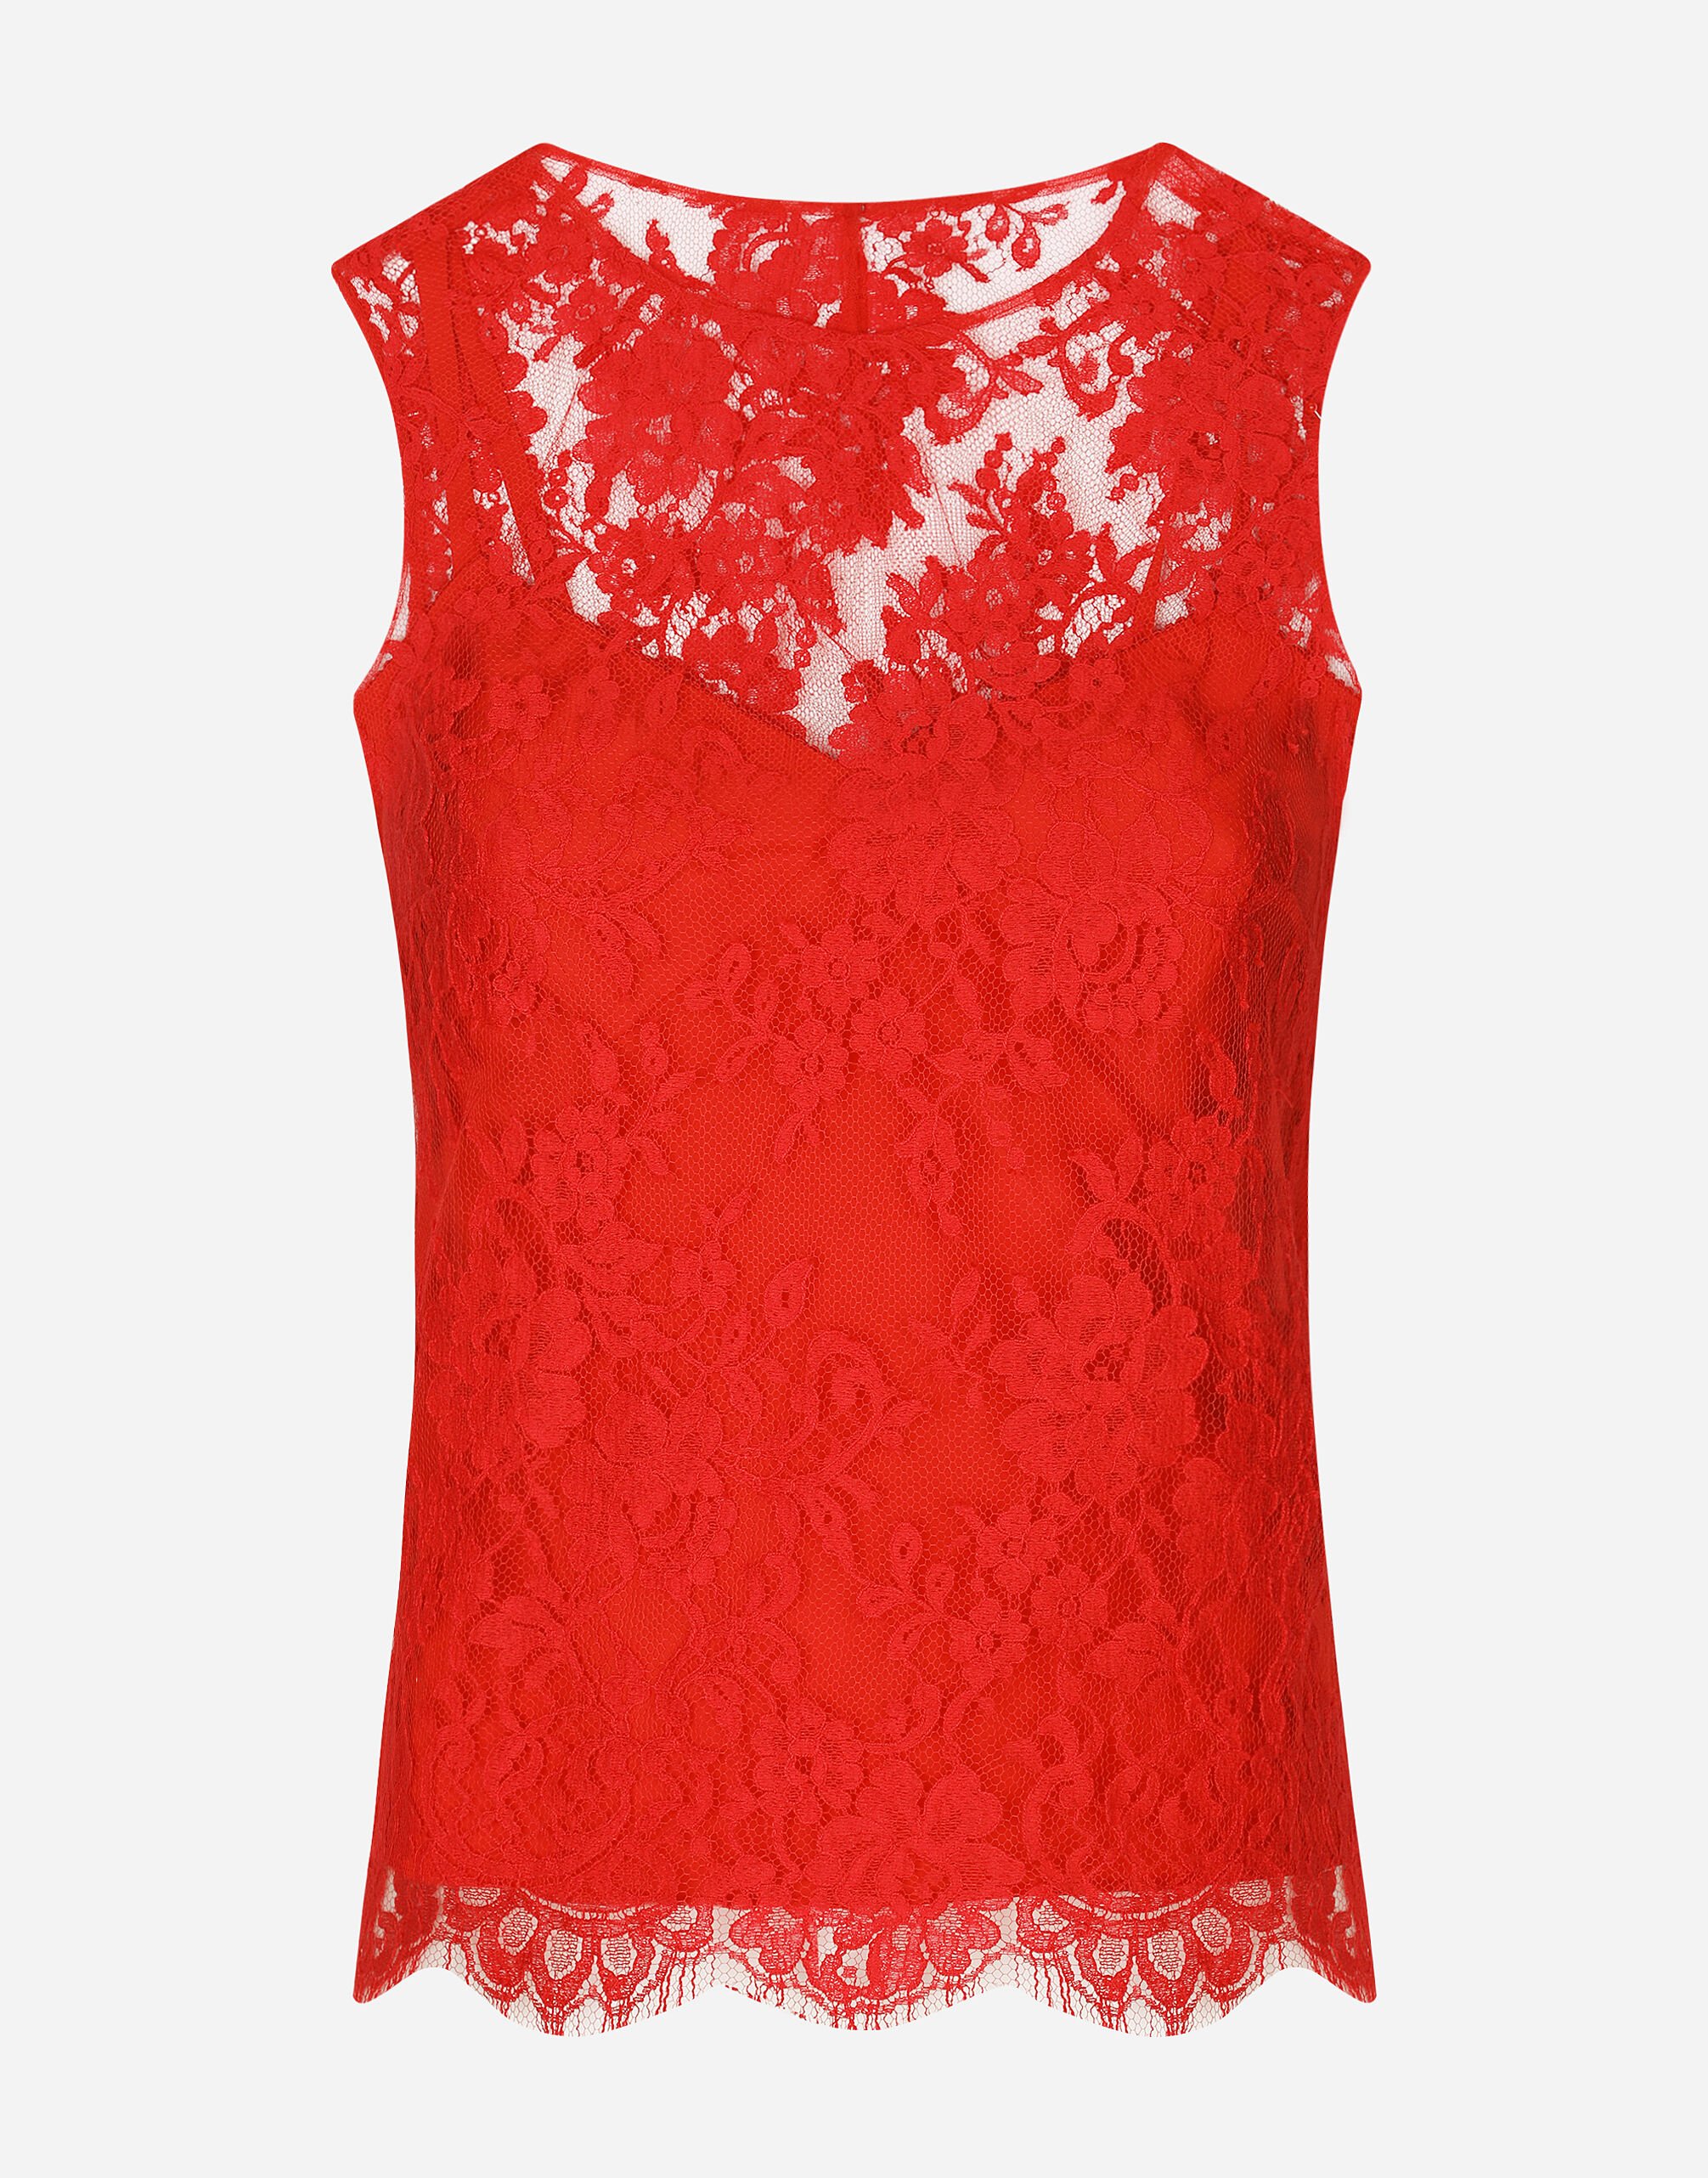 Dolce&Gabbana Floral Chantilly lace top Red F79BUTFURHM